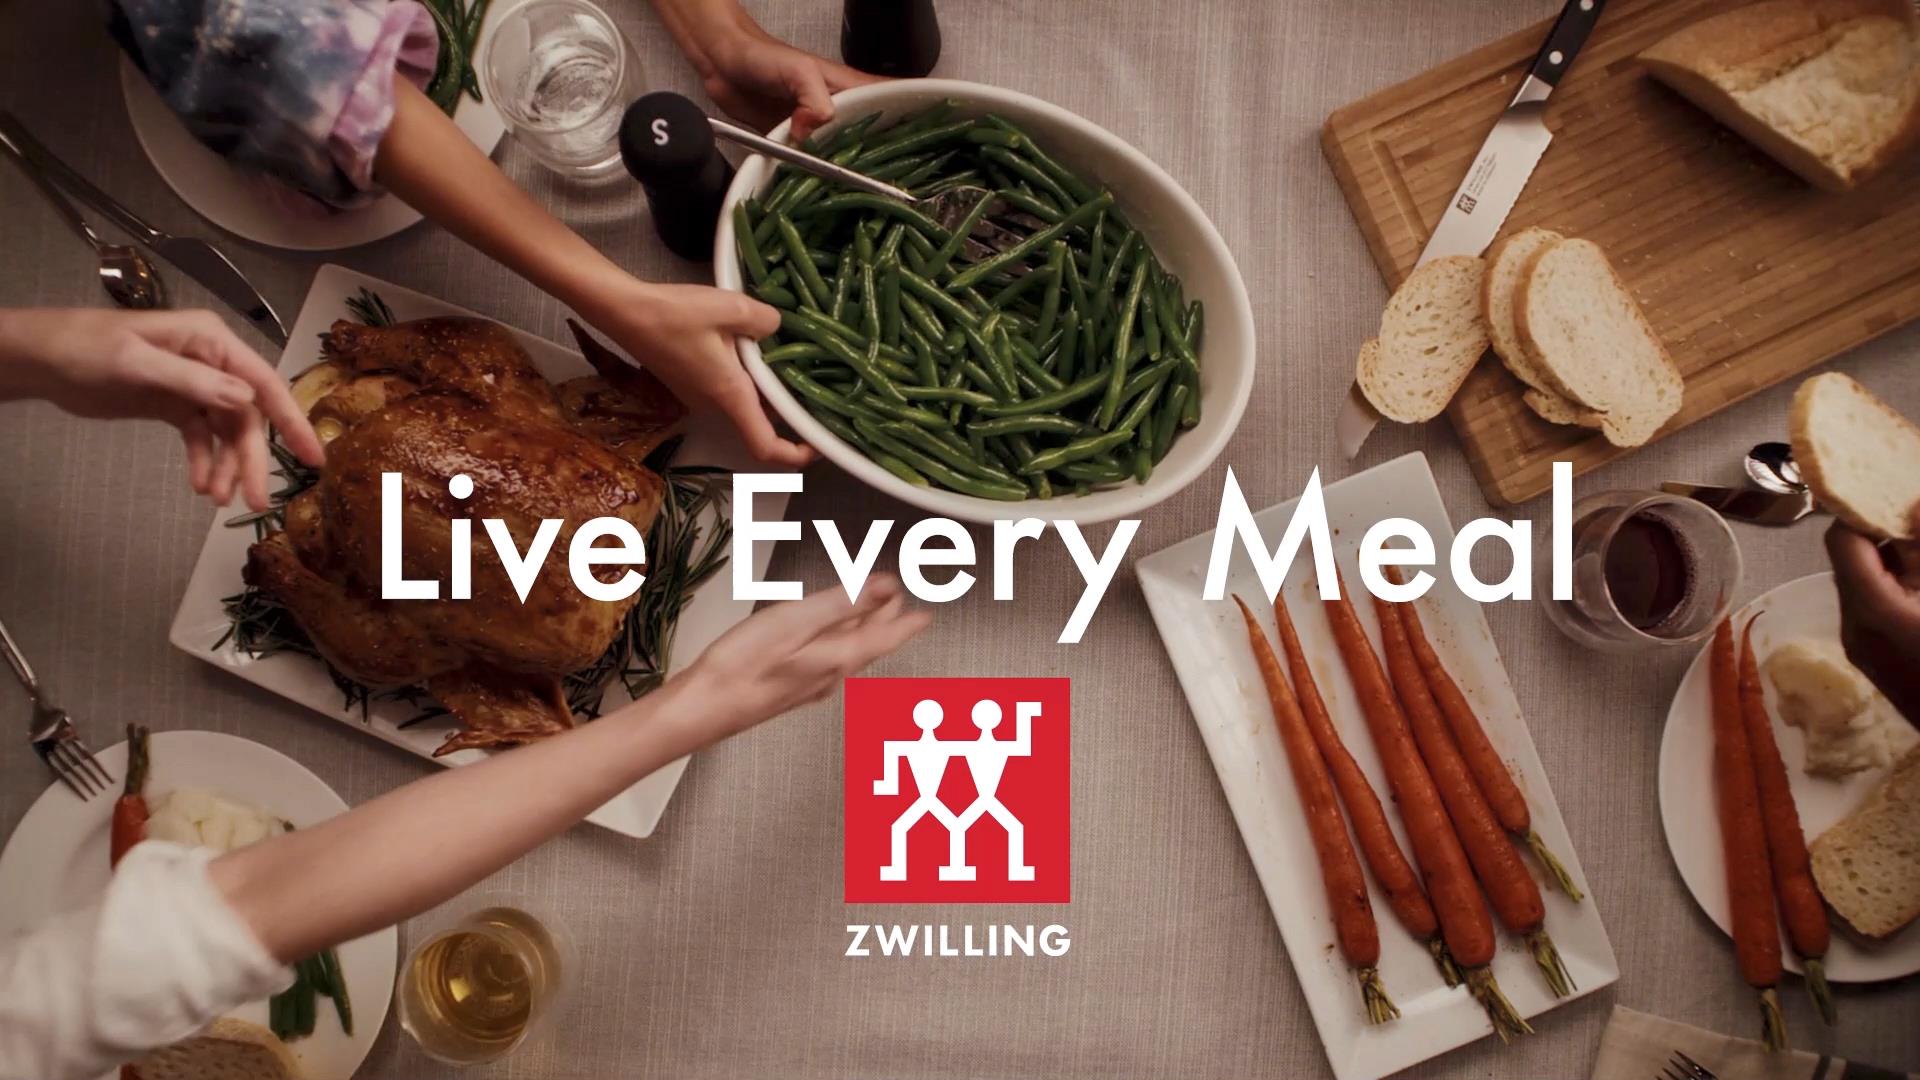 ZWILLING - Live Every Meal